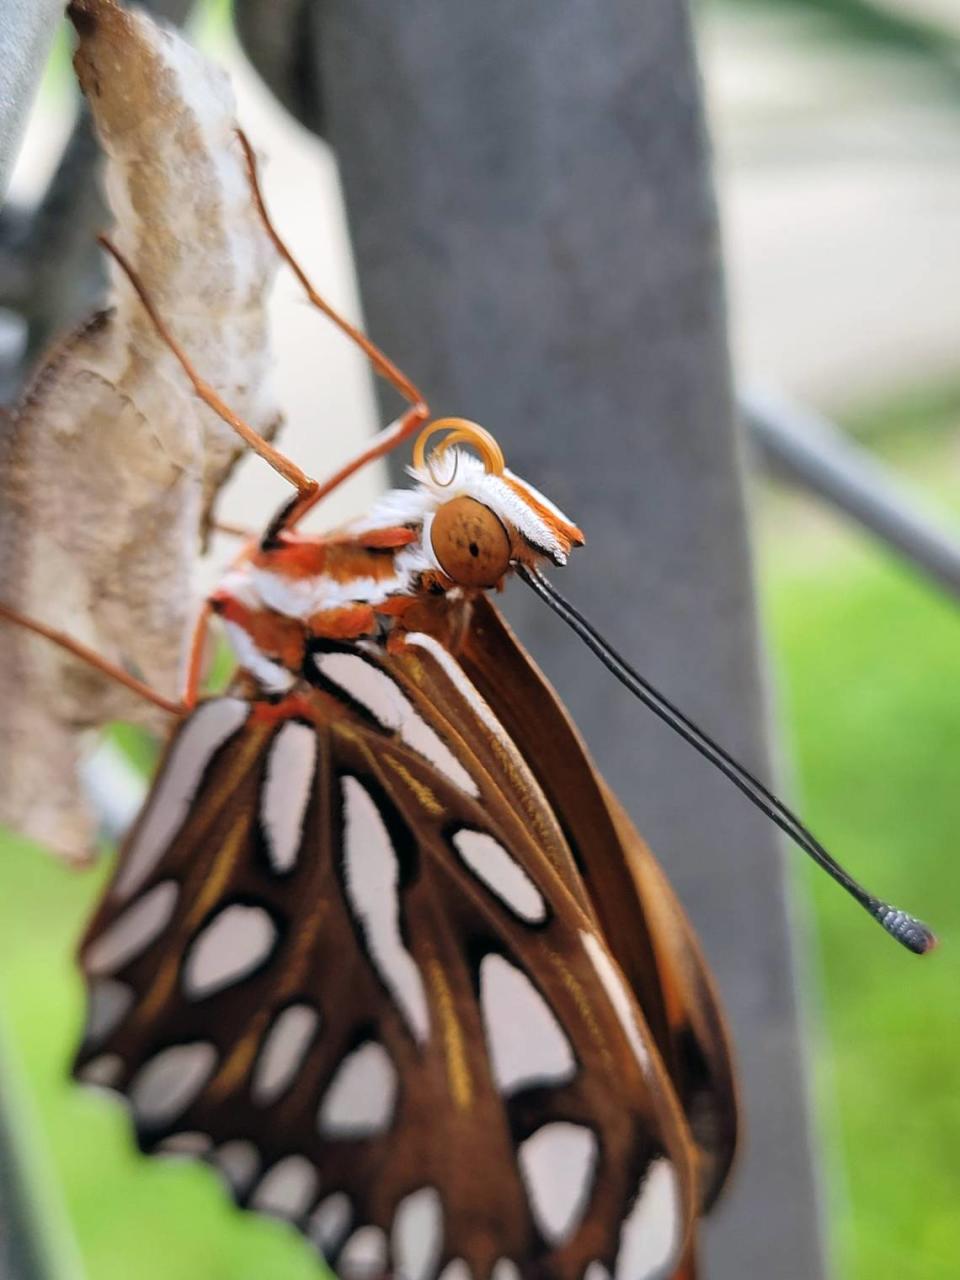 A Gulf butterfly emerges from a cocoon in Desensi’s yard.